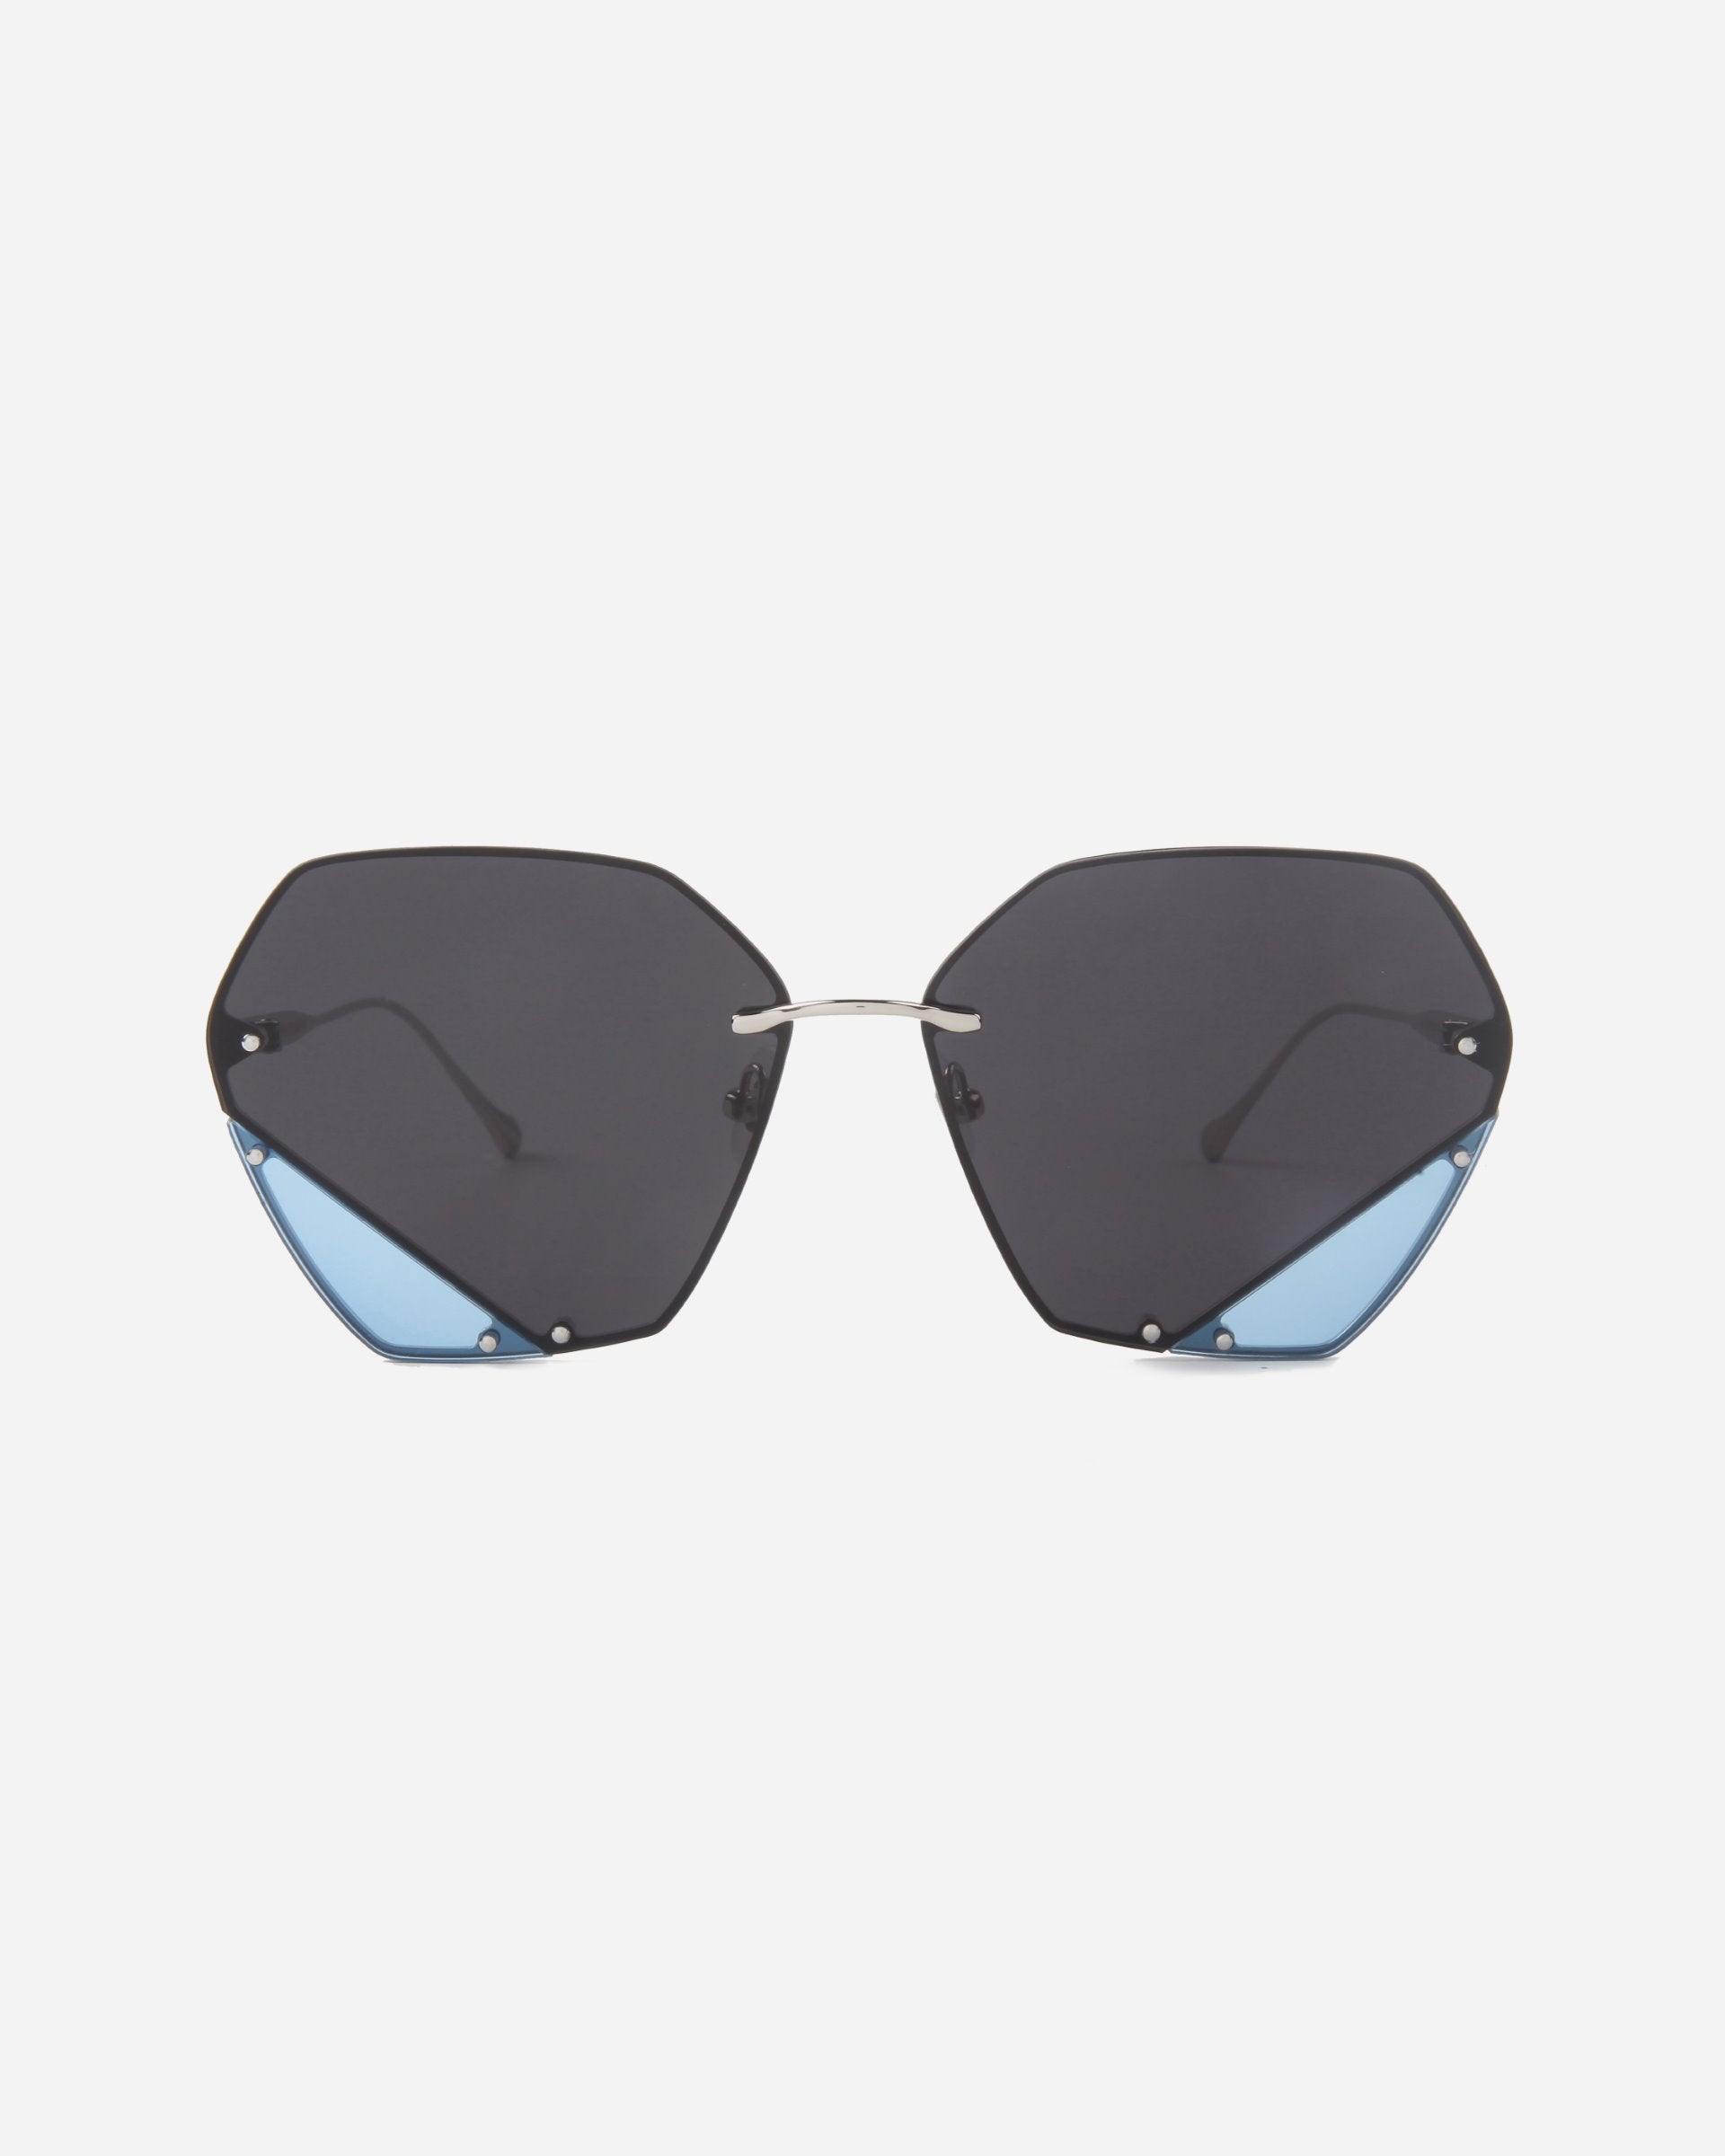 A pair of sunglasses featuring uniquely shaped, geometric lenses with angular cuts and a hint of light blue tint at the lower corners. The bridge is minimalistic and silver-toned, complemented by jadestone nosepads, with no visible frame around the lenses. The product is Icy by For Art's Sake®. The background is white.